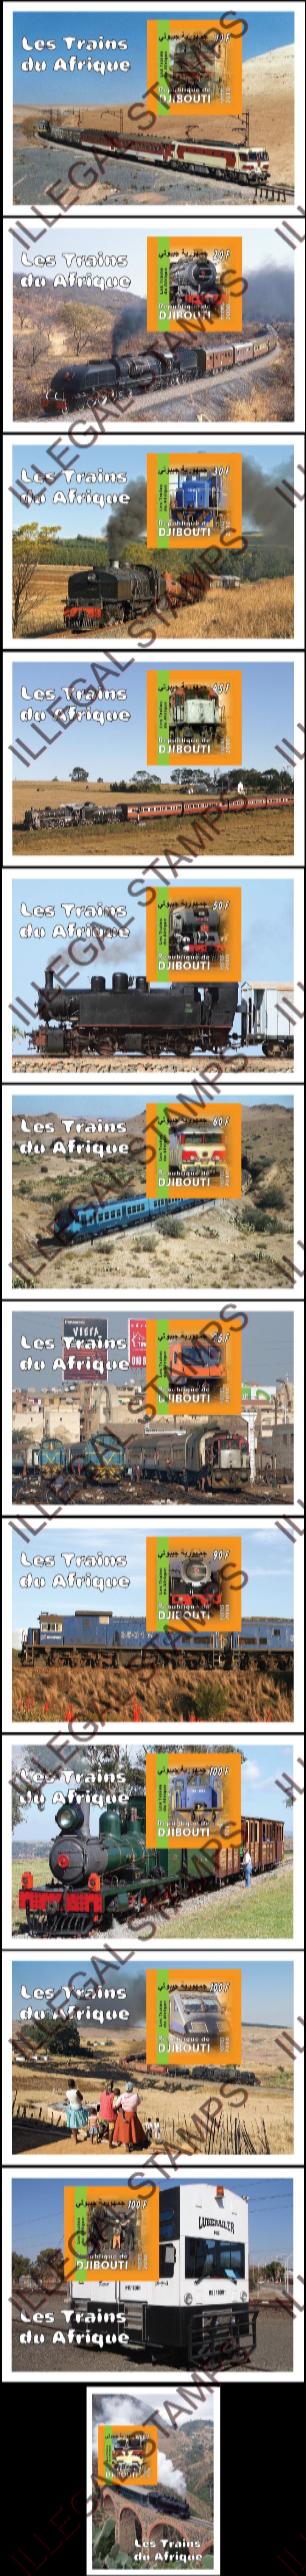 Djibouti 2010 African Trains Illegal Stamp Souvenir Sheets of 1